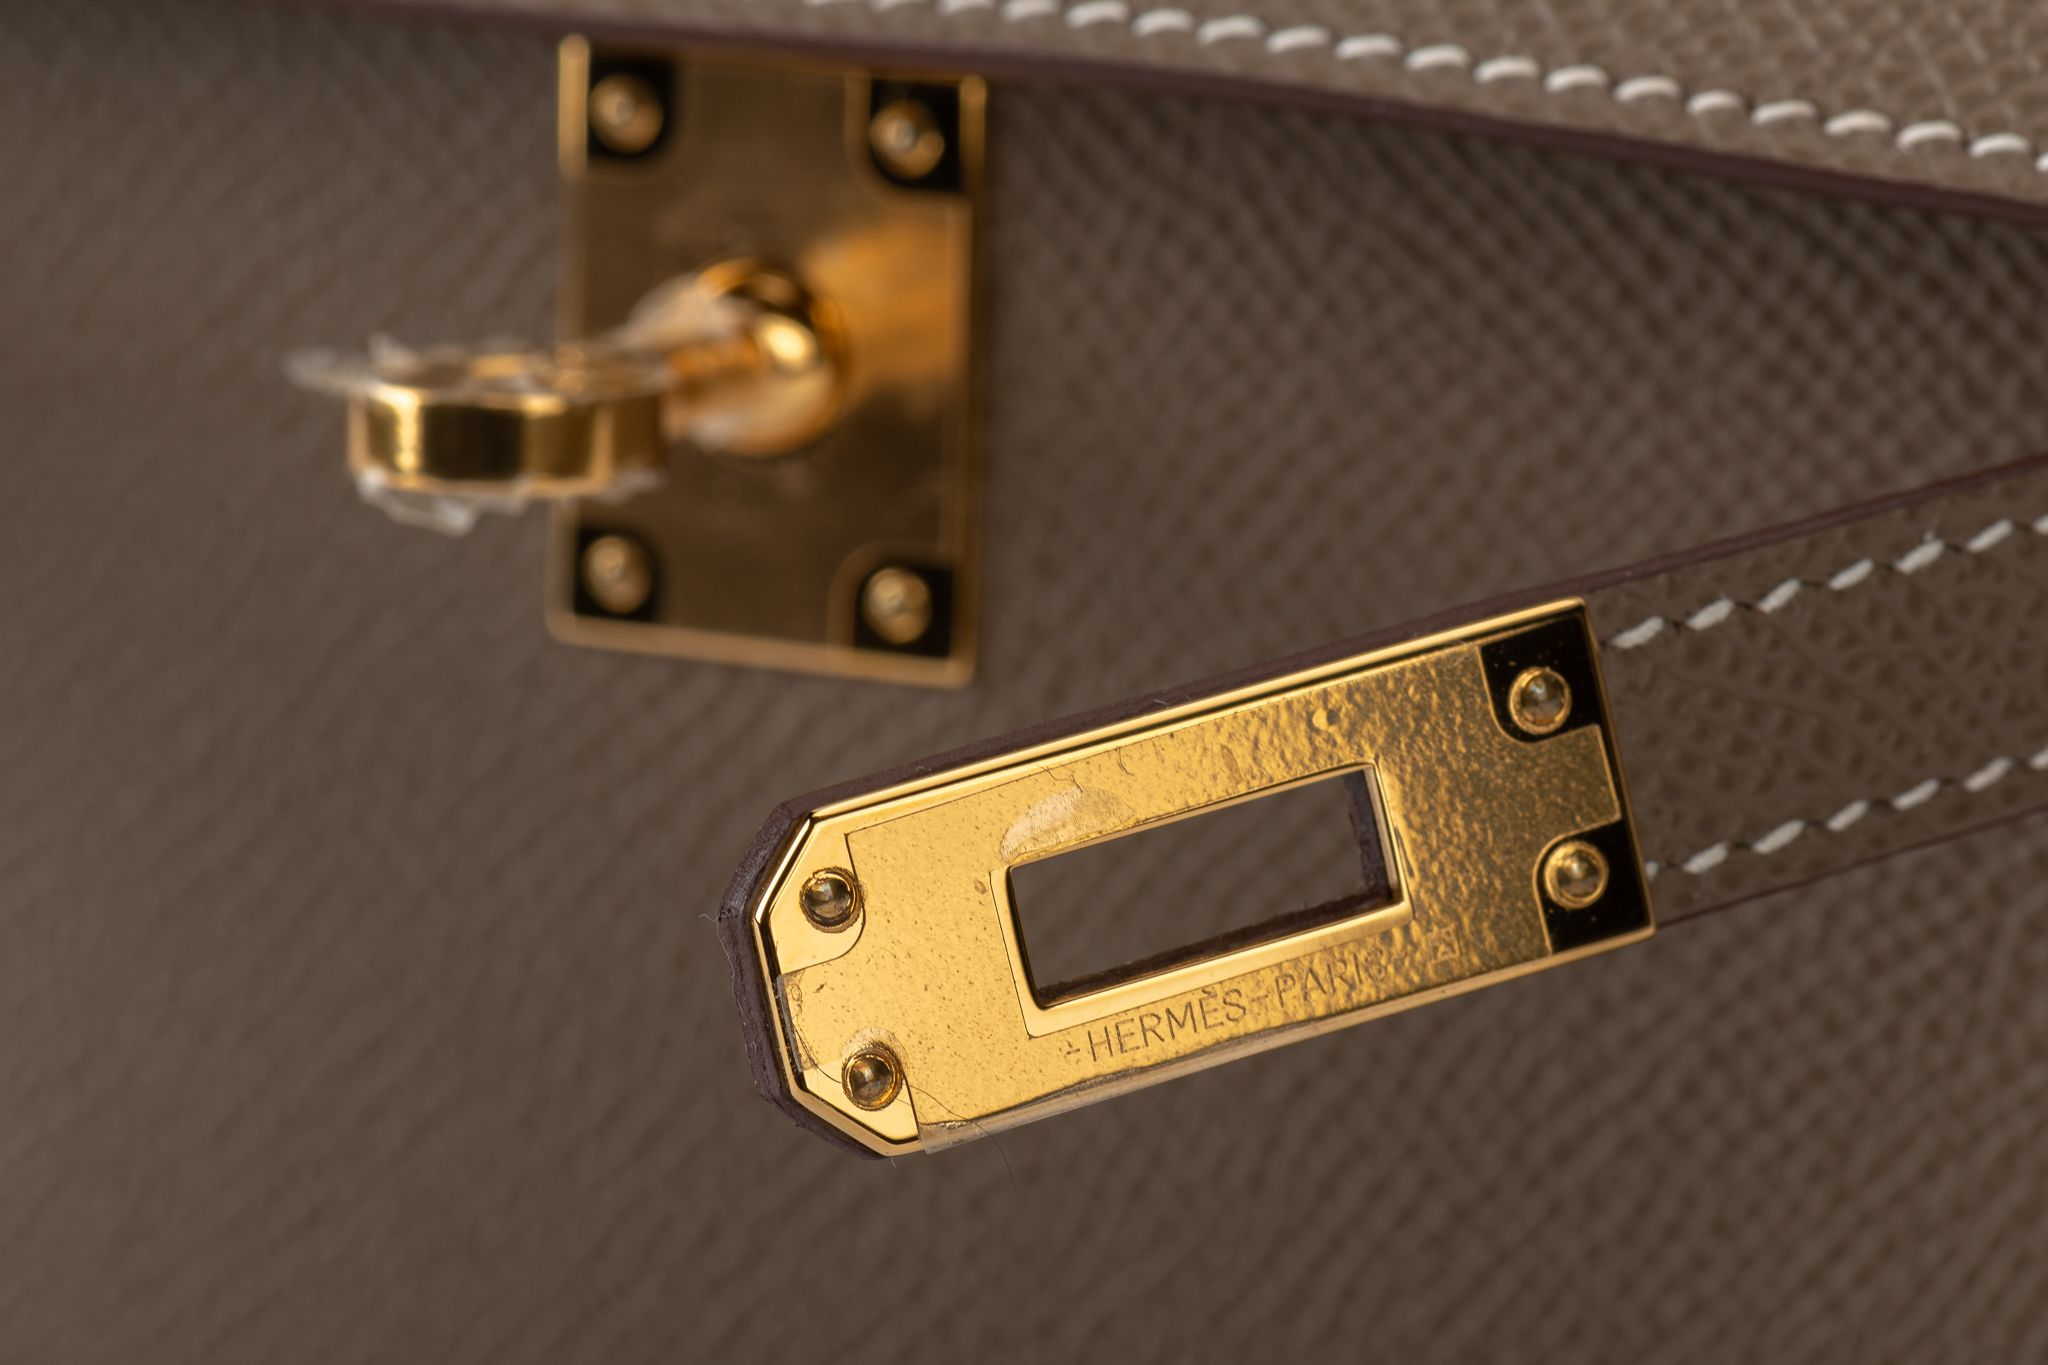 Introducing the stunning rare Hermès Mini Kelly 20 Nata and Trench